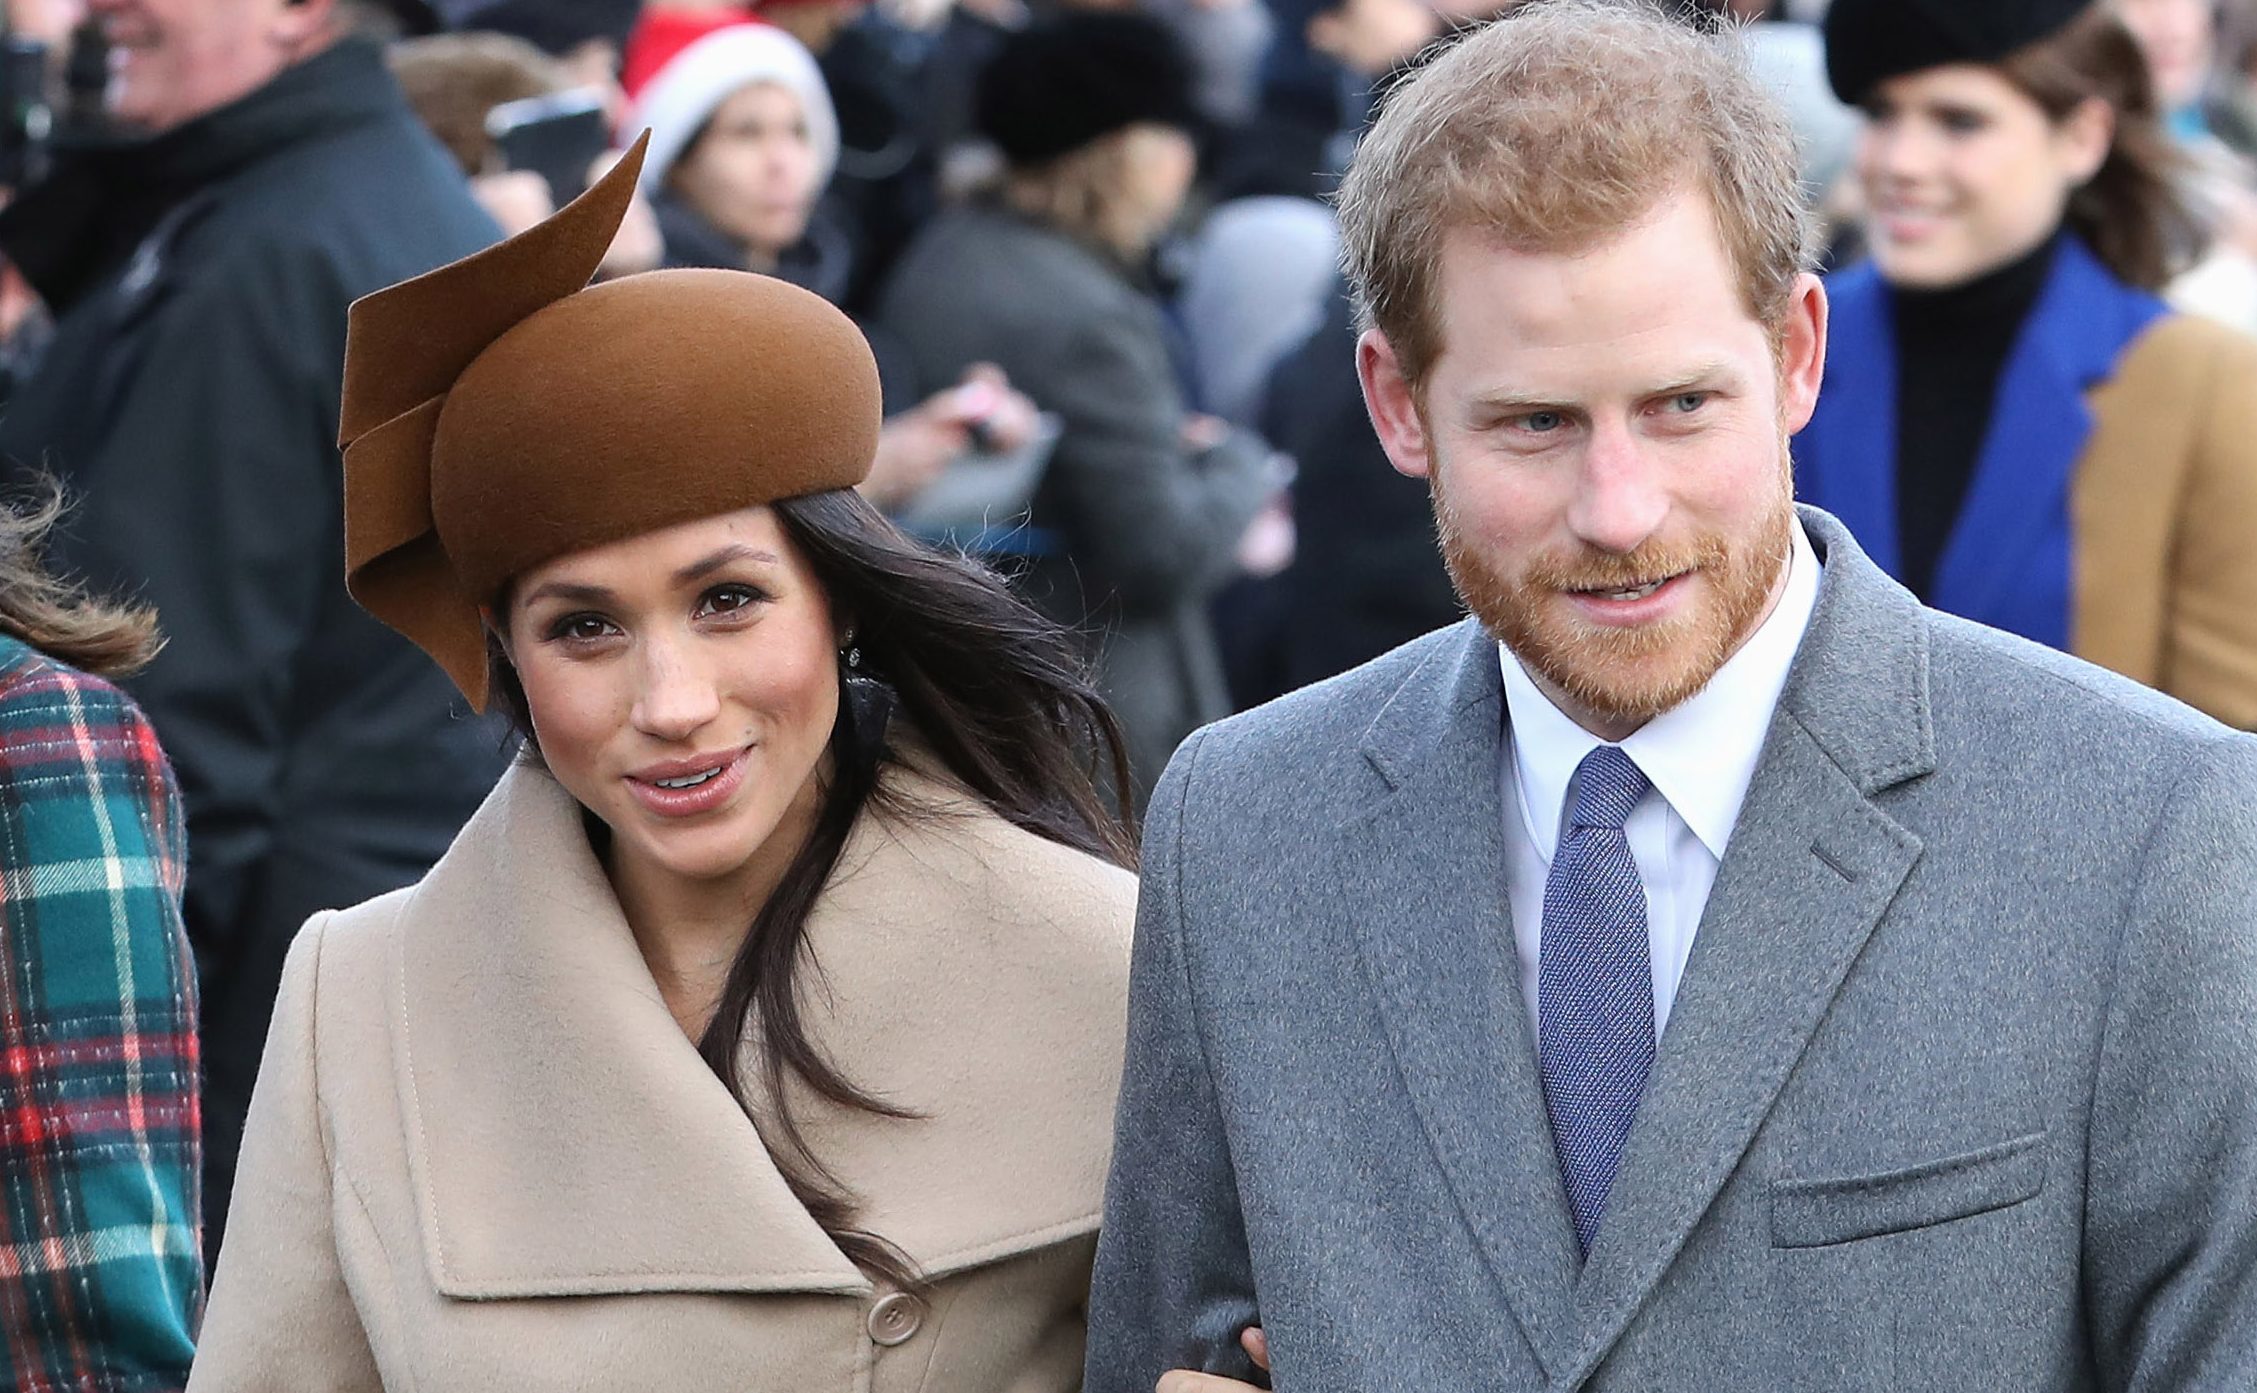 Meghan Markle and Prince Harry (Chris Jackson/Getty Images)